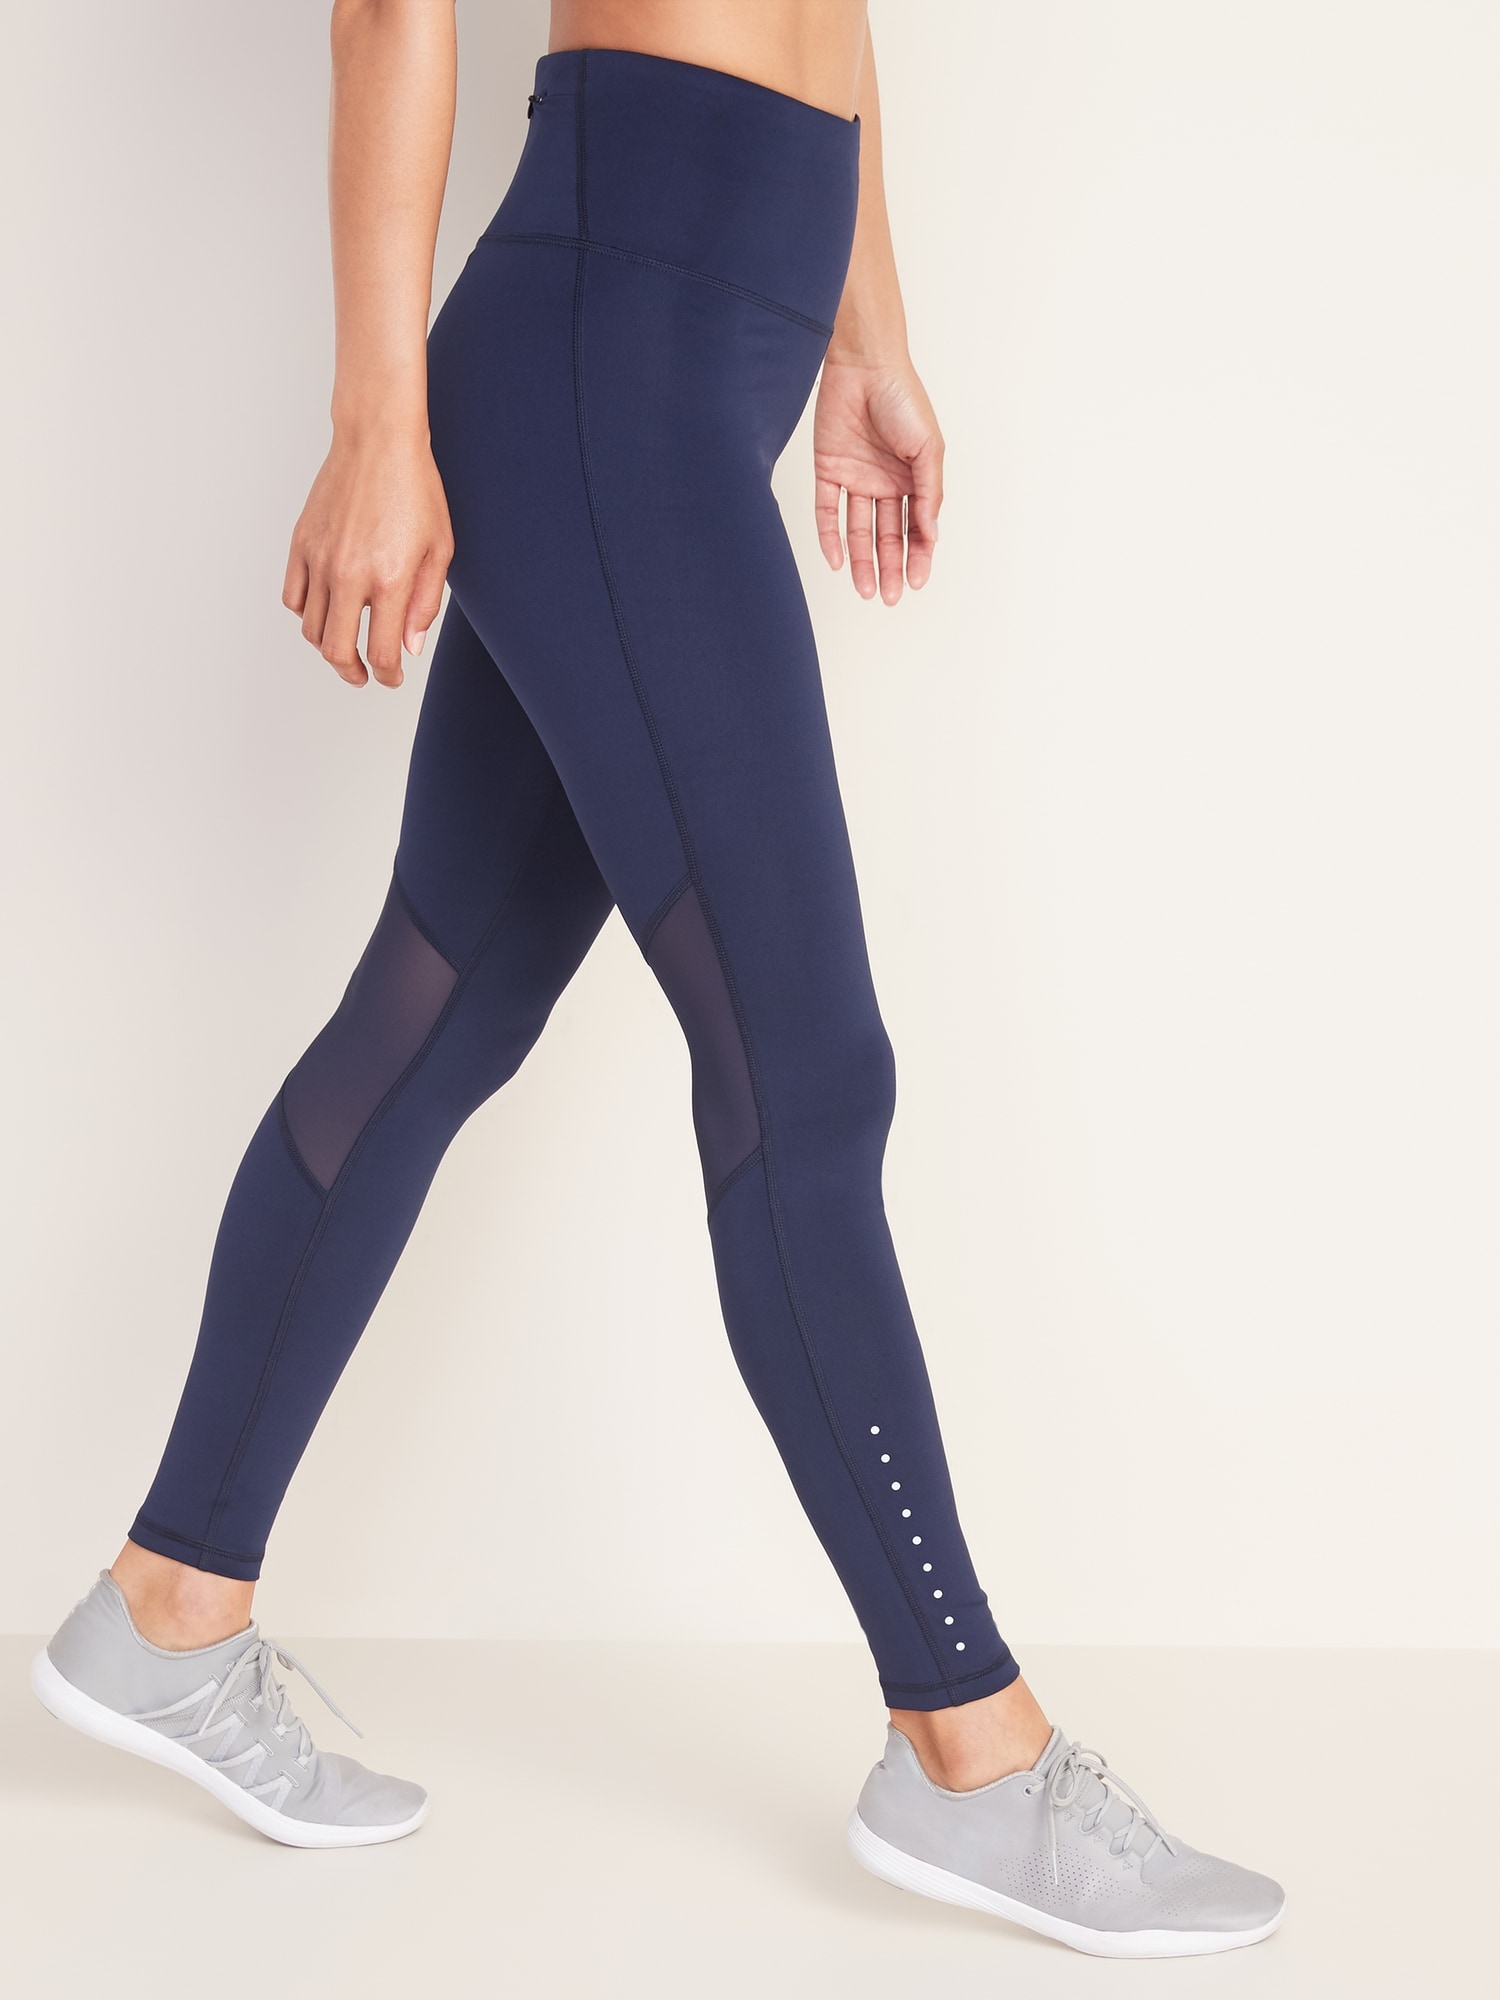 Old Navy, Pants & Jumpsuits, Old Navy Active Elevate Leggings